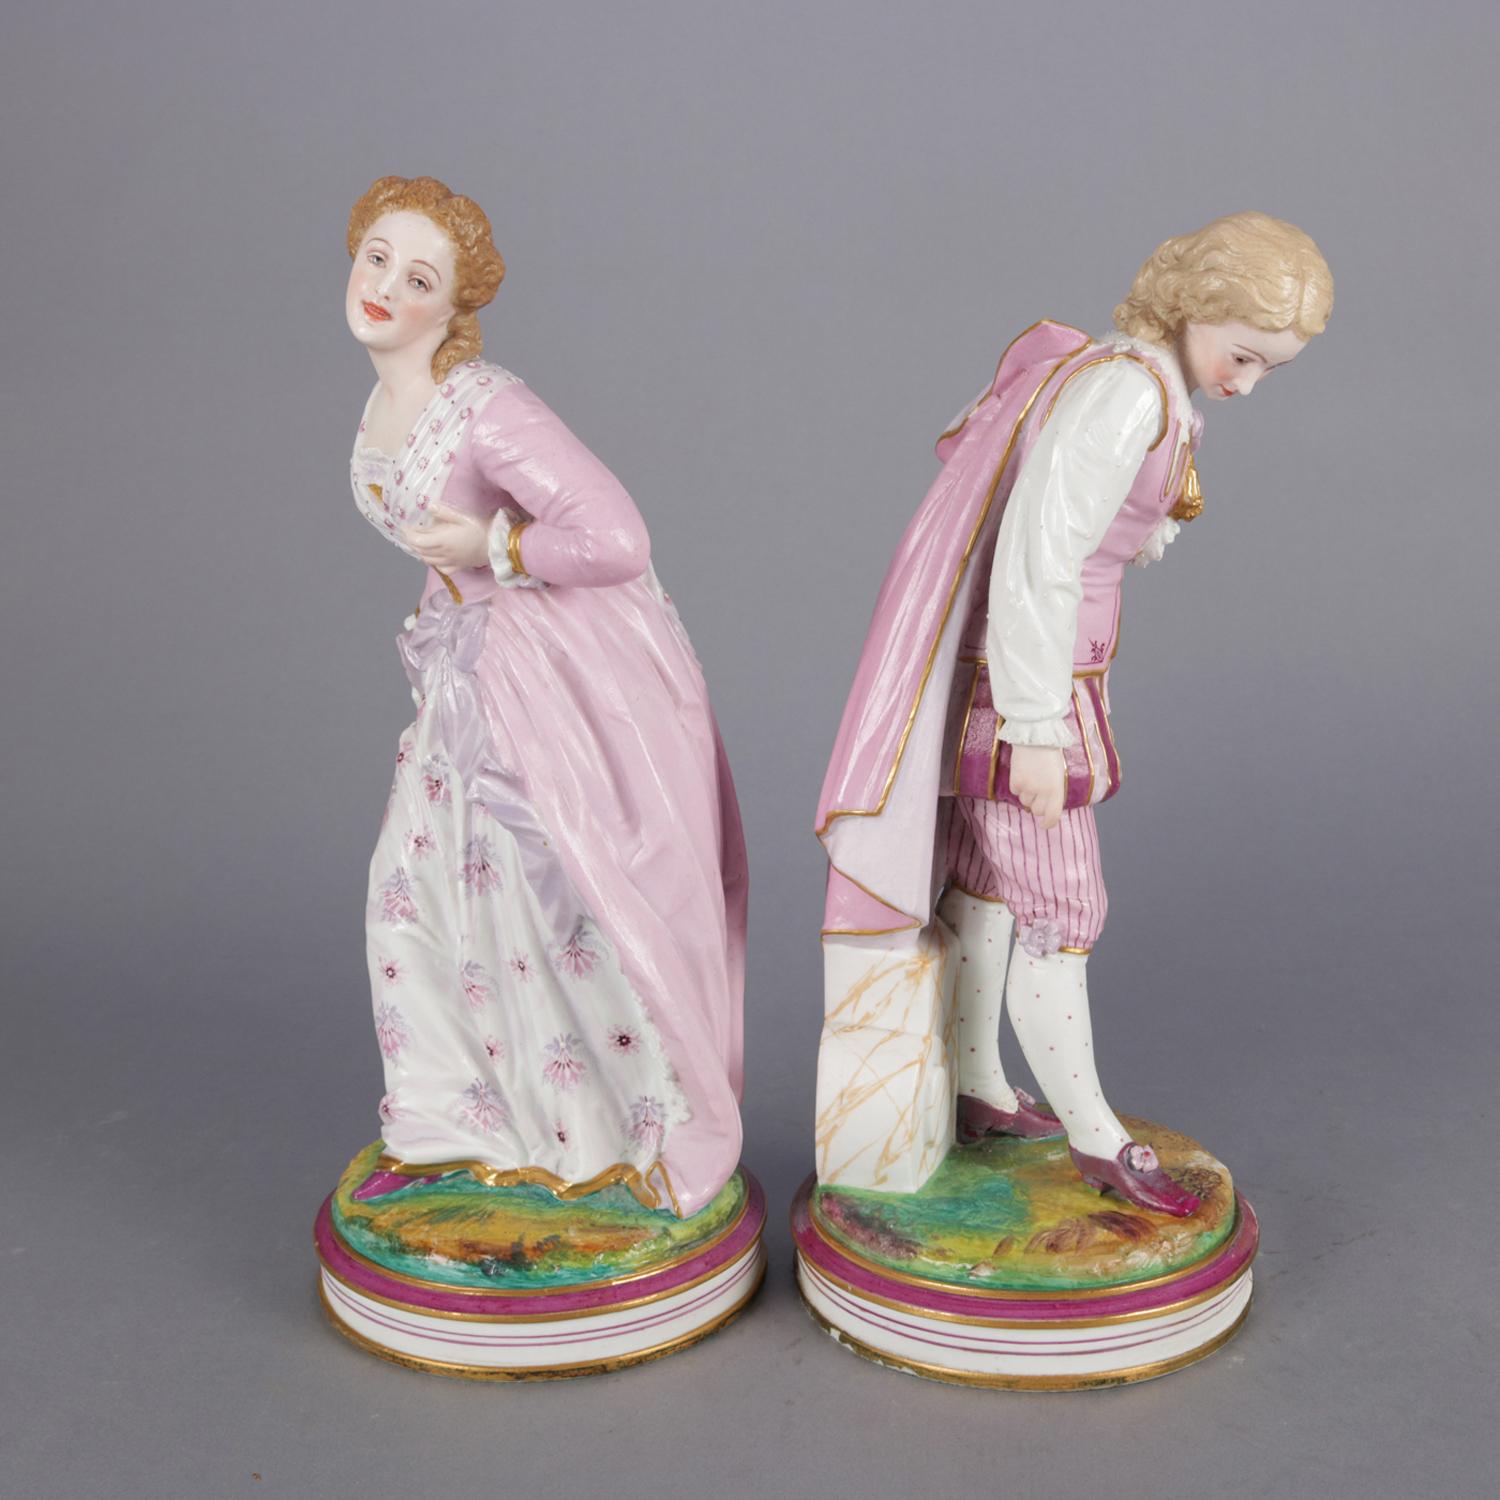 Pair of Italian Vincenzo-Bertolotti porcelain figures include hand-painted and gilt decorated courting couple in countryside, VB mark on base, circa 1940

Measures: 14.5